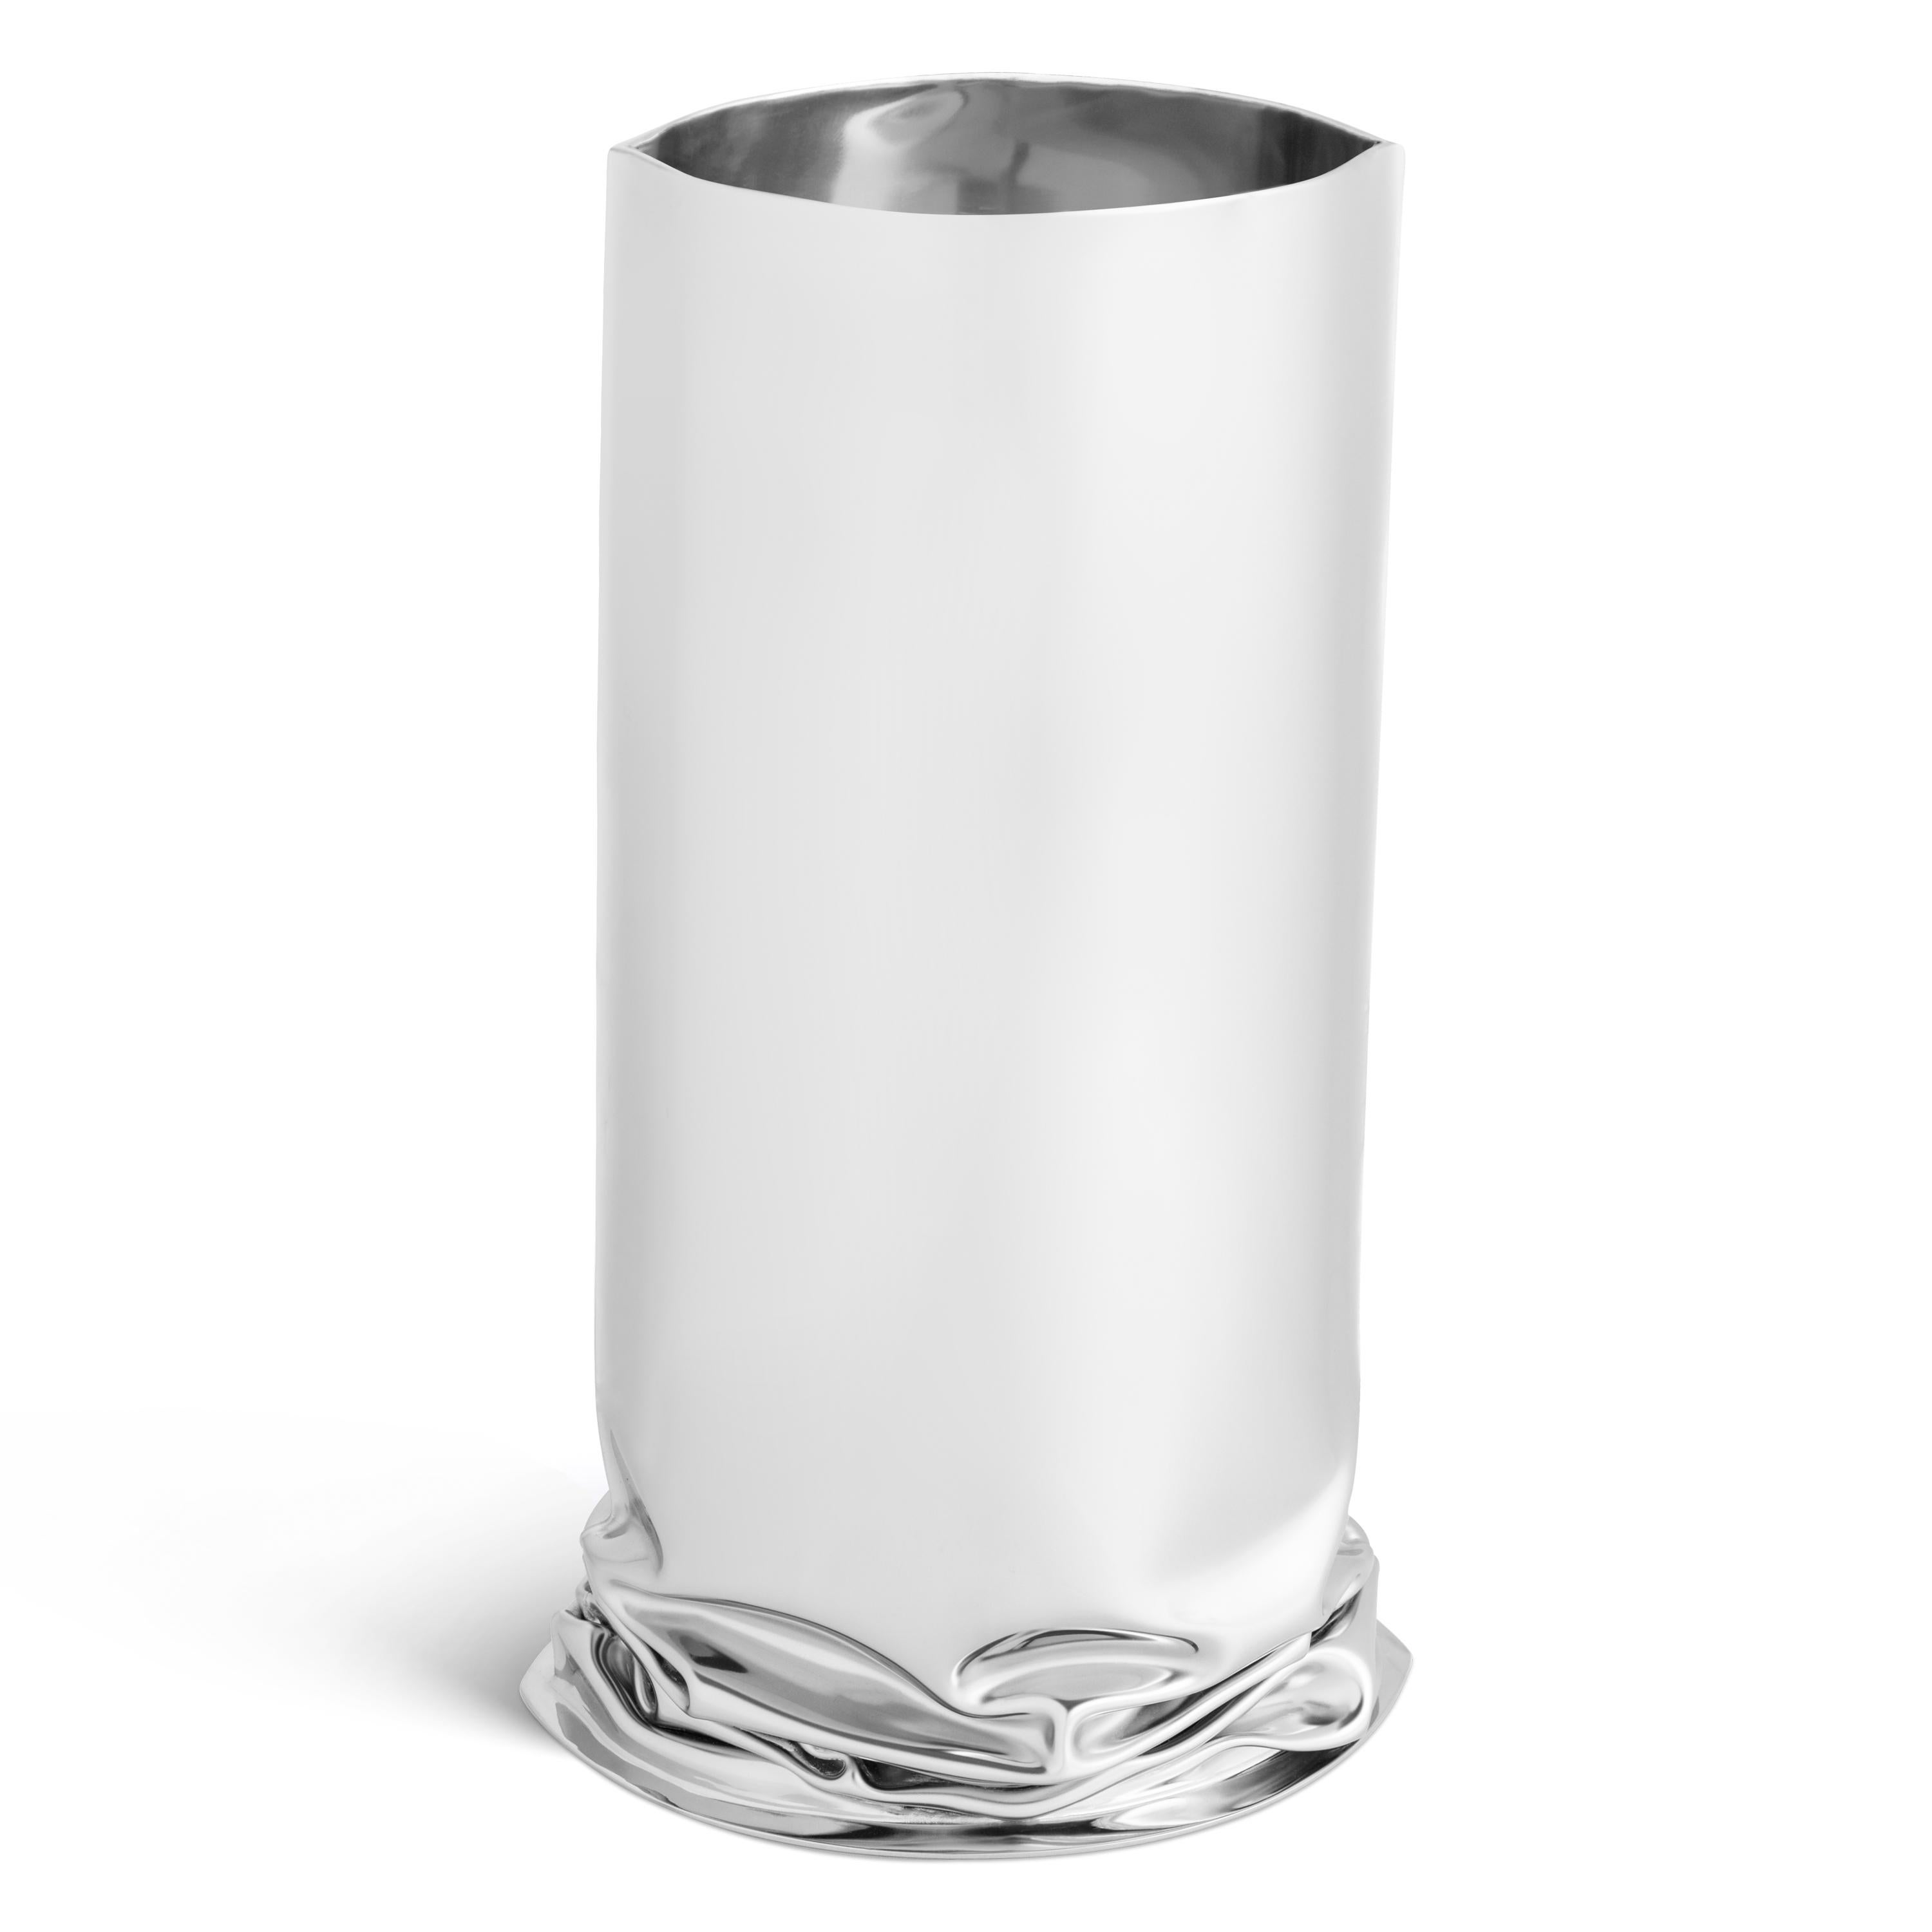 Polished Set of 3 Contemporary Vases 'Crash' by Zieta, Stainless Steel For Sale